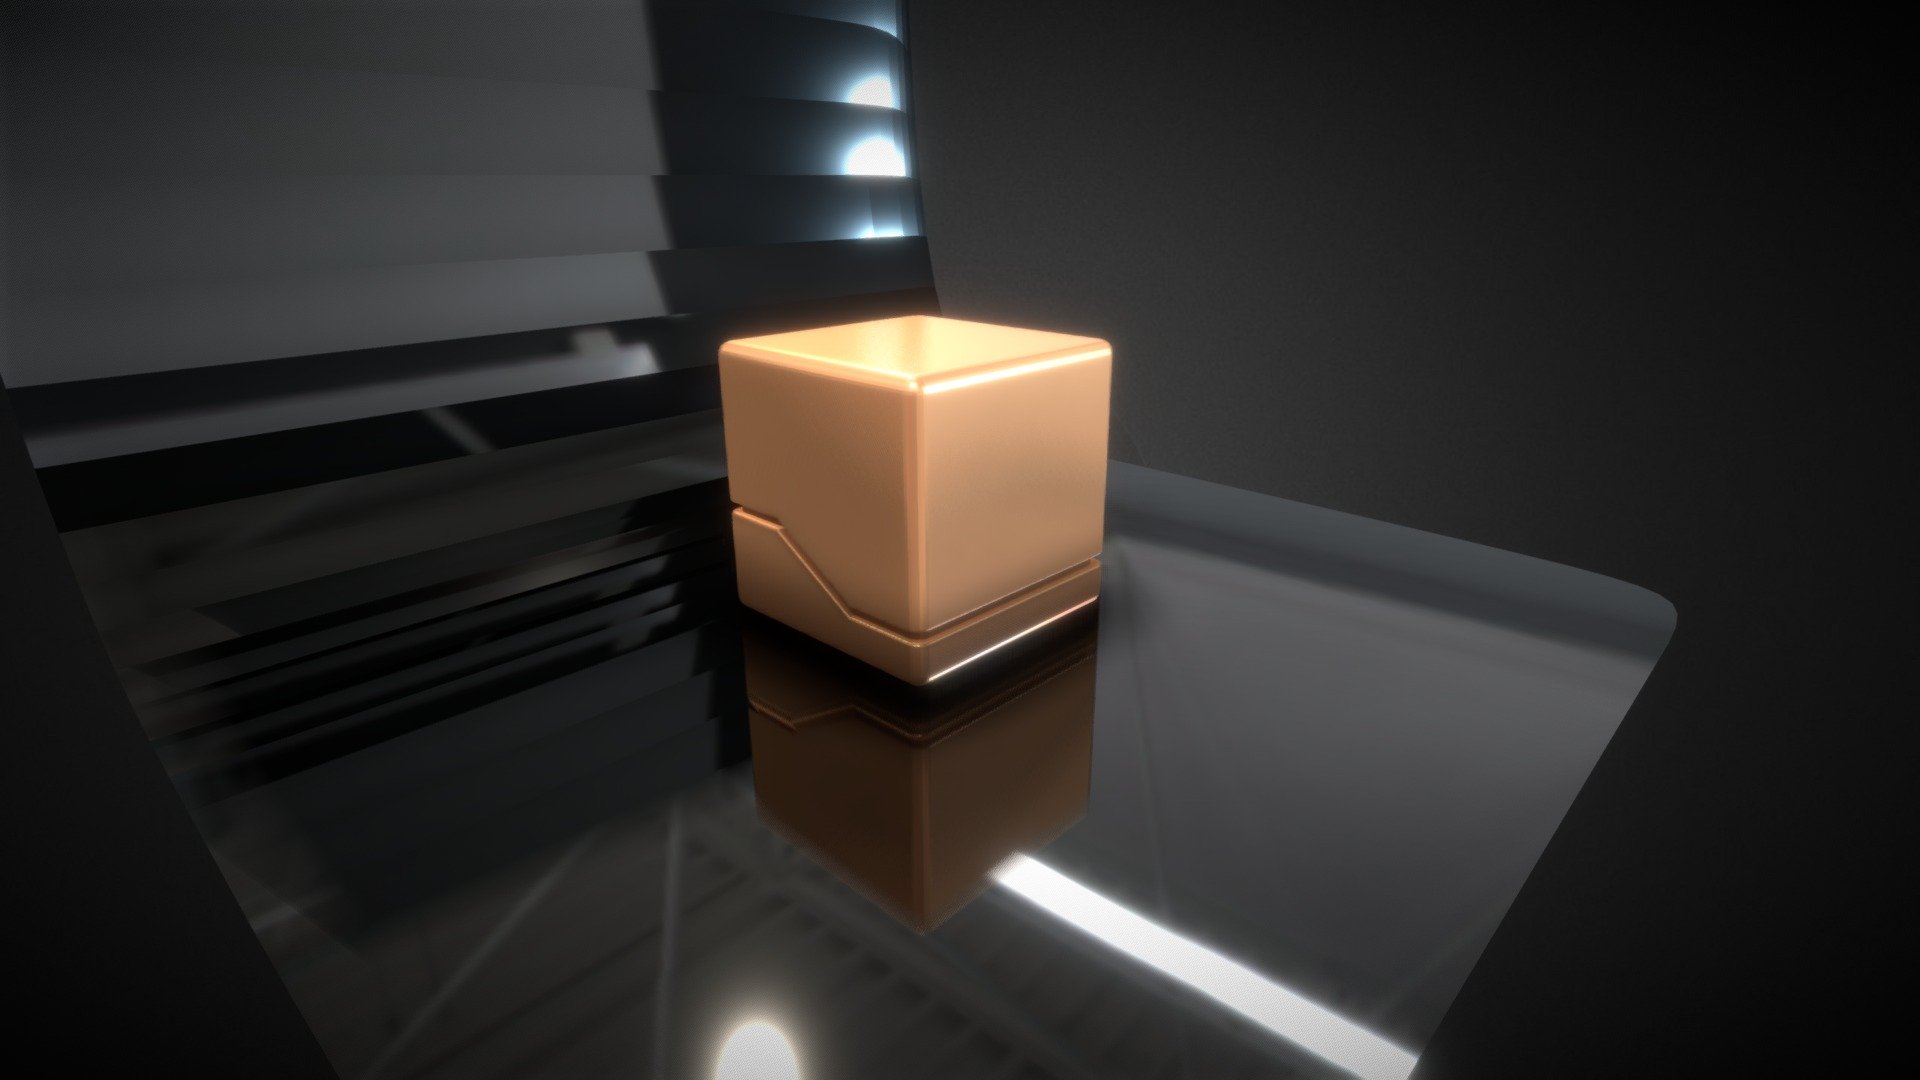 Wholesome game Sci-Fi Cube - Download Free 3D model by ErinRinArt ...